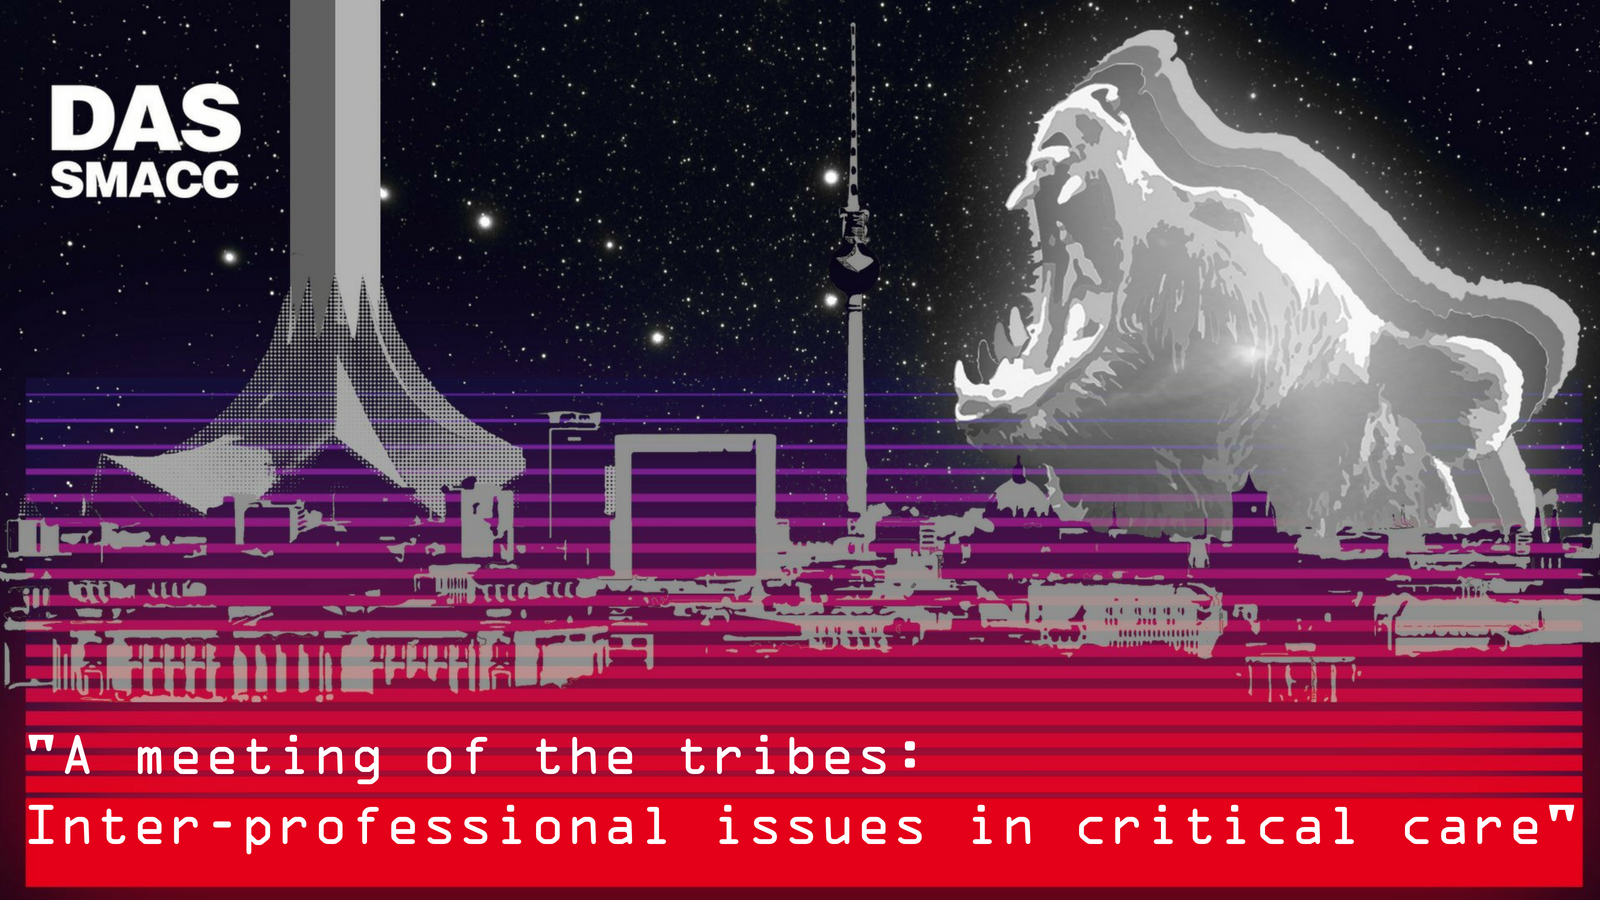 A meeting of the tribes: Inter-professional issues in critical care